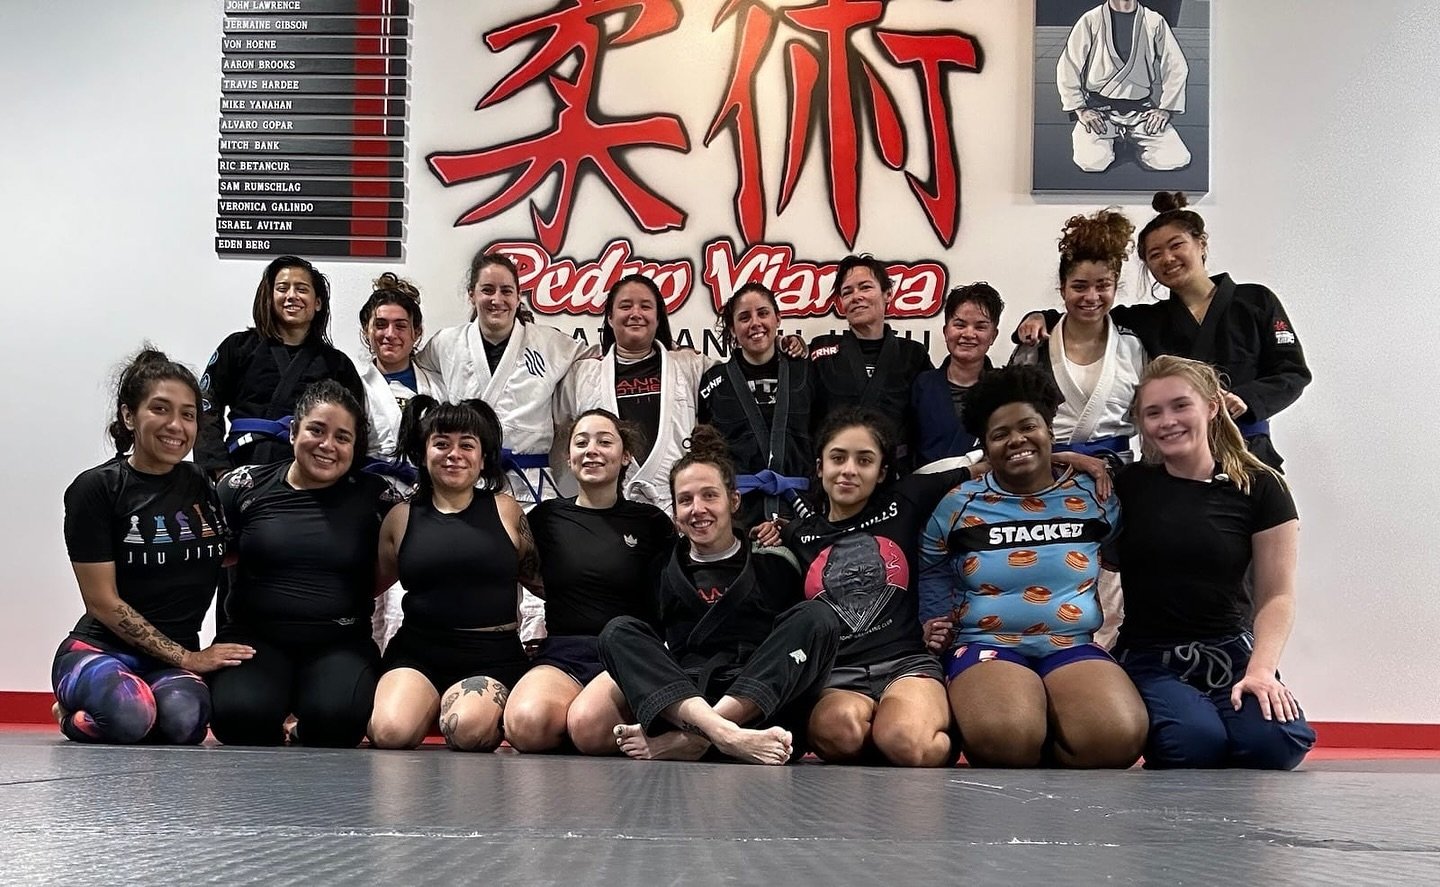 Awesome turnout for Women's Open Mat! Great rounds with great people! Join us next time! Stay tuned 👀 for the next one!